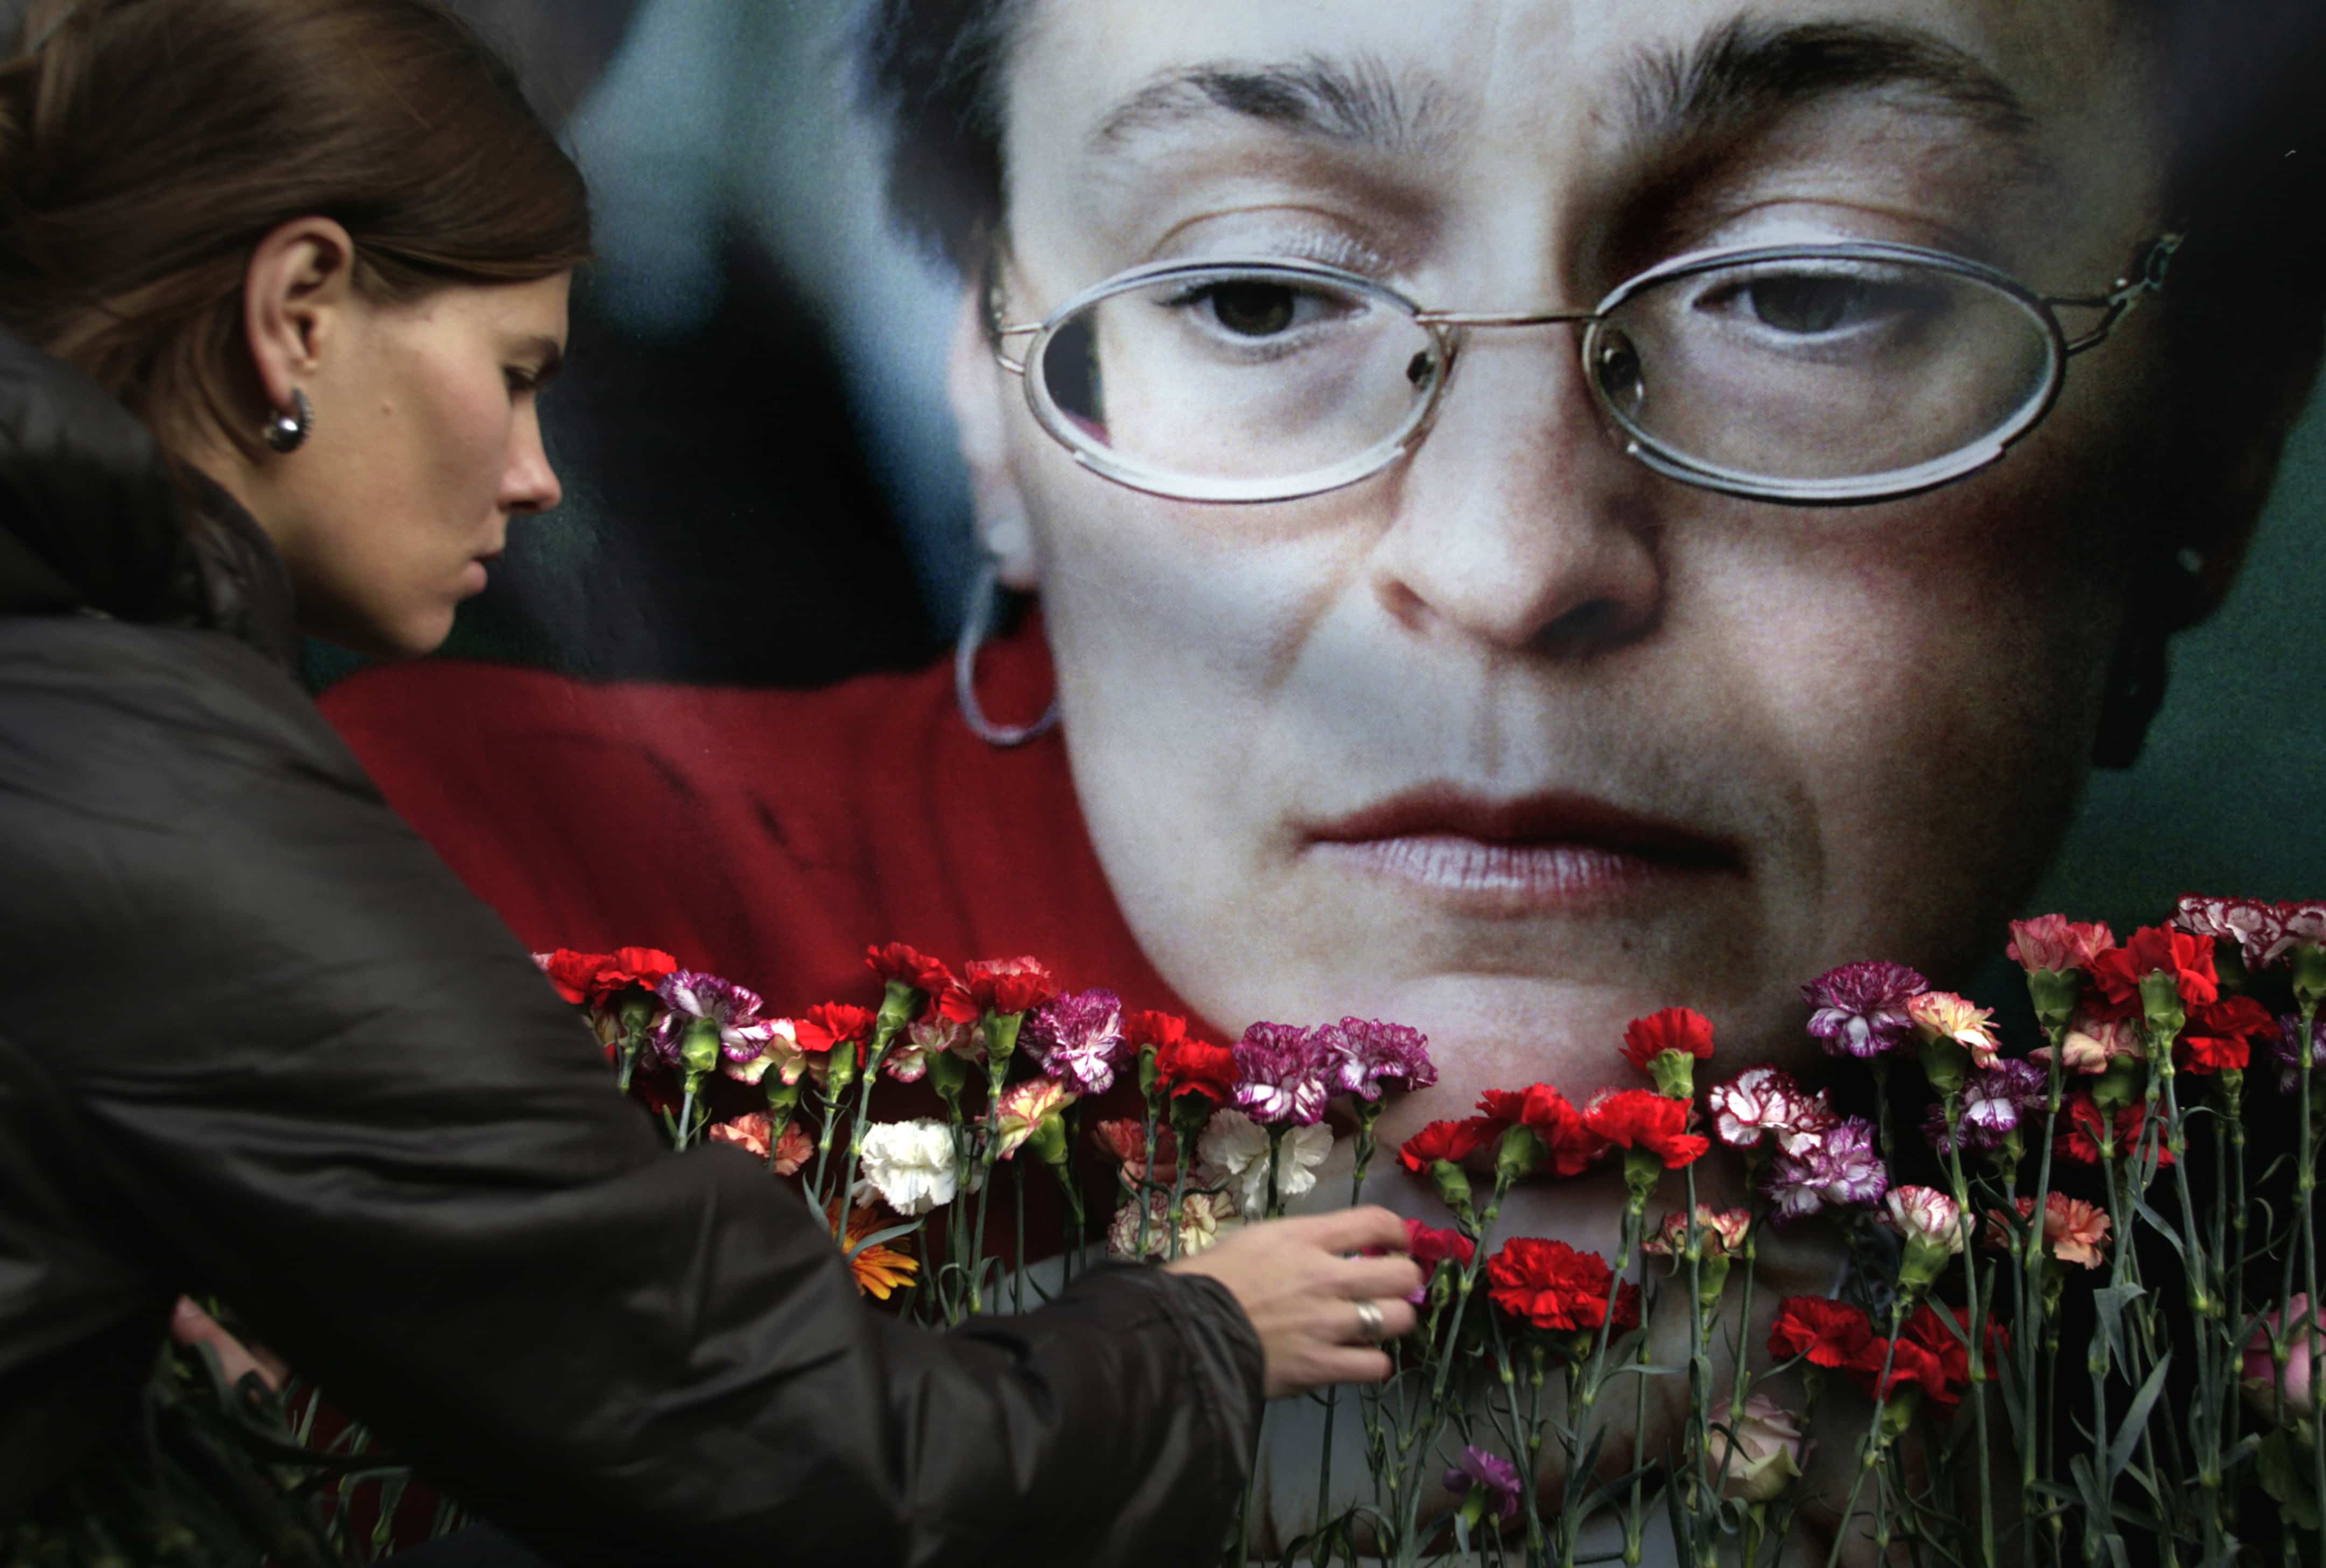 A woman places flowers before a portrait of slain Russian journalist Anna Politkovskaya, in Moscow, on 7 October 2009., AP Photo/Pavel Golovkin, File